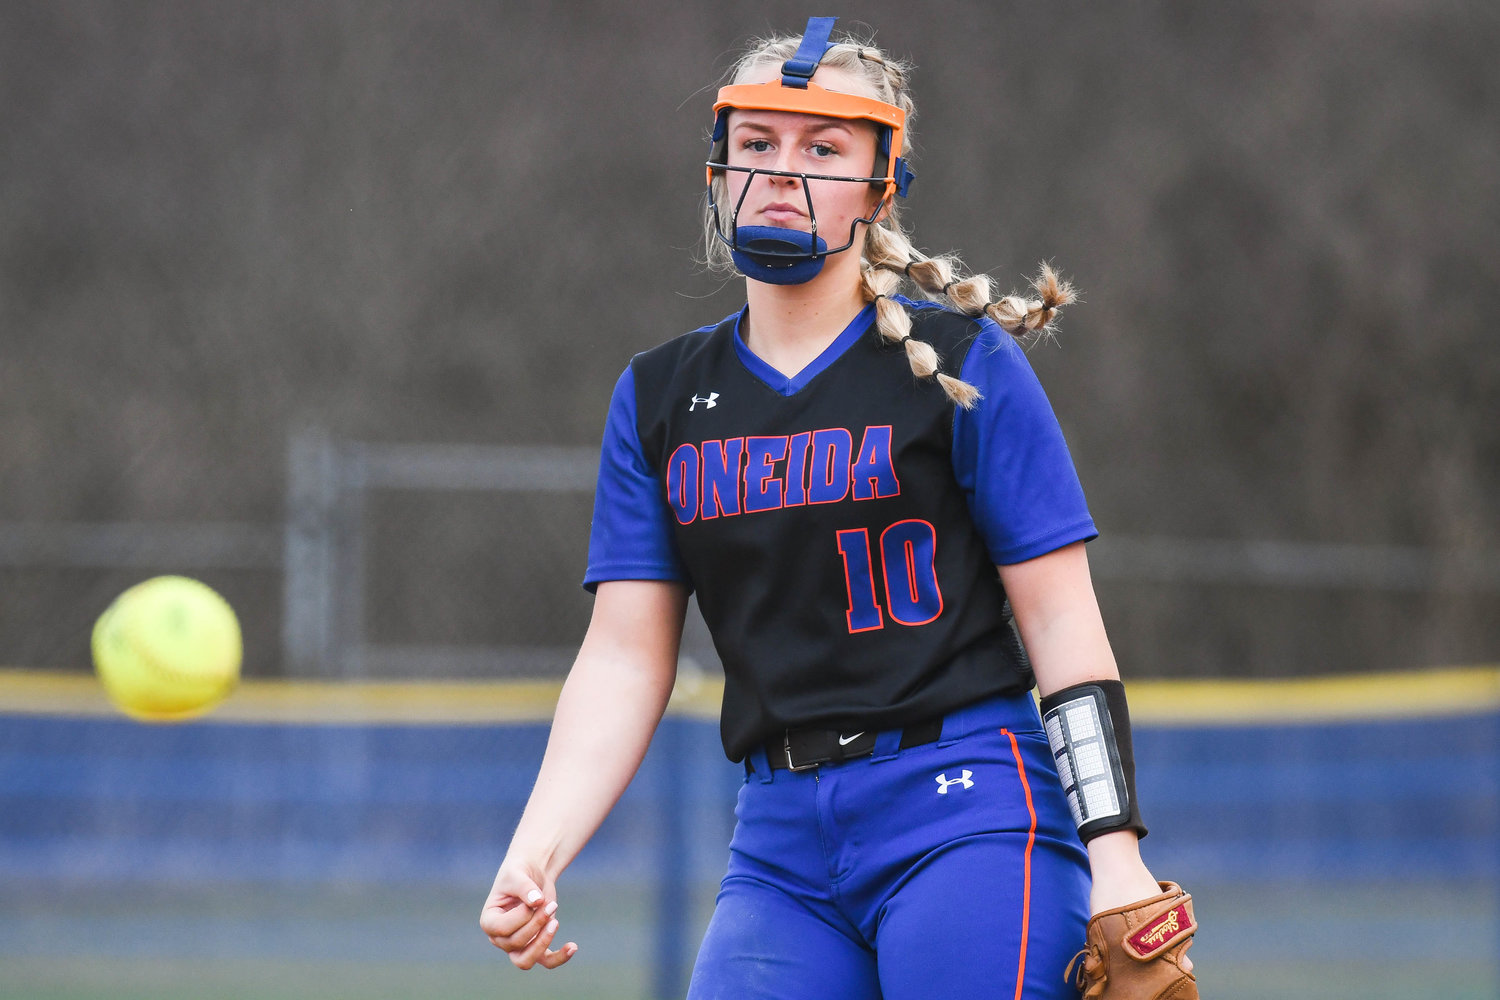 DELIVERING TWO WINS — Oneida’s Kerrigan Crysler delivers a pitch during the game against Notre Dame on Wednesday. Crysler pitched the team to a 5-1 win then to a 5-3 victory over Cicero-North Syracuse the next day.